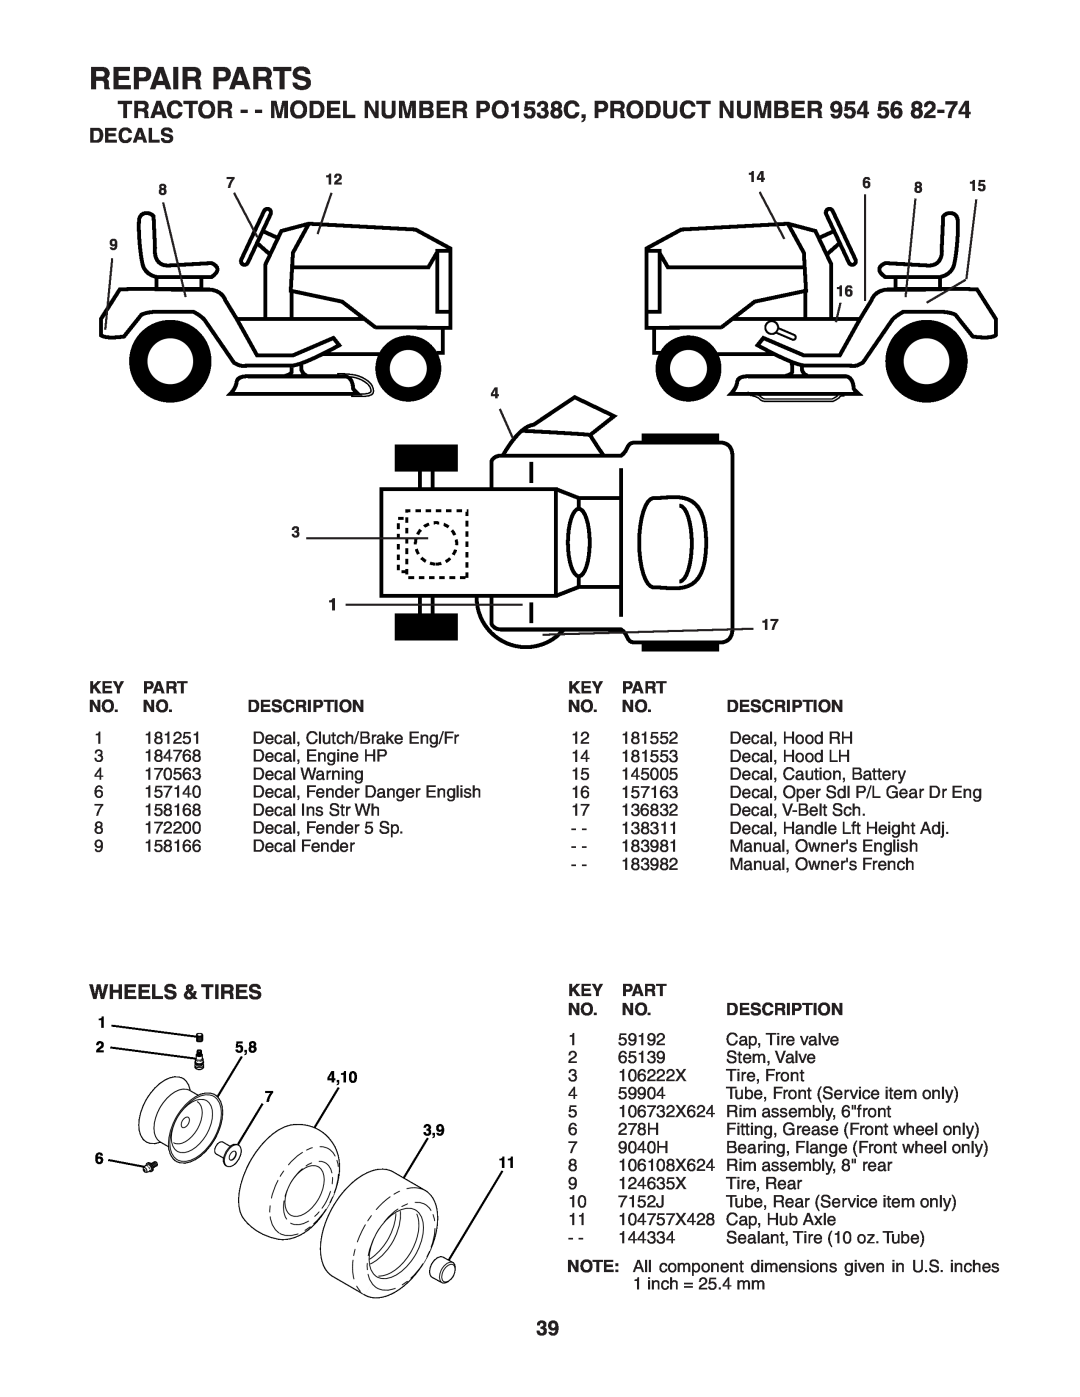 Poulan 183981 manual Decals, Wheels & Tires, Repair Parts, TRACTOR - - MODEL NUMBER PO1538C, PRODUCT NUMBER, 25,8 4,10 